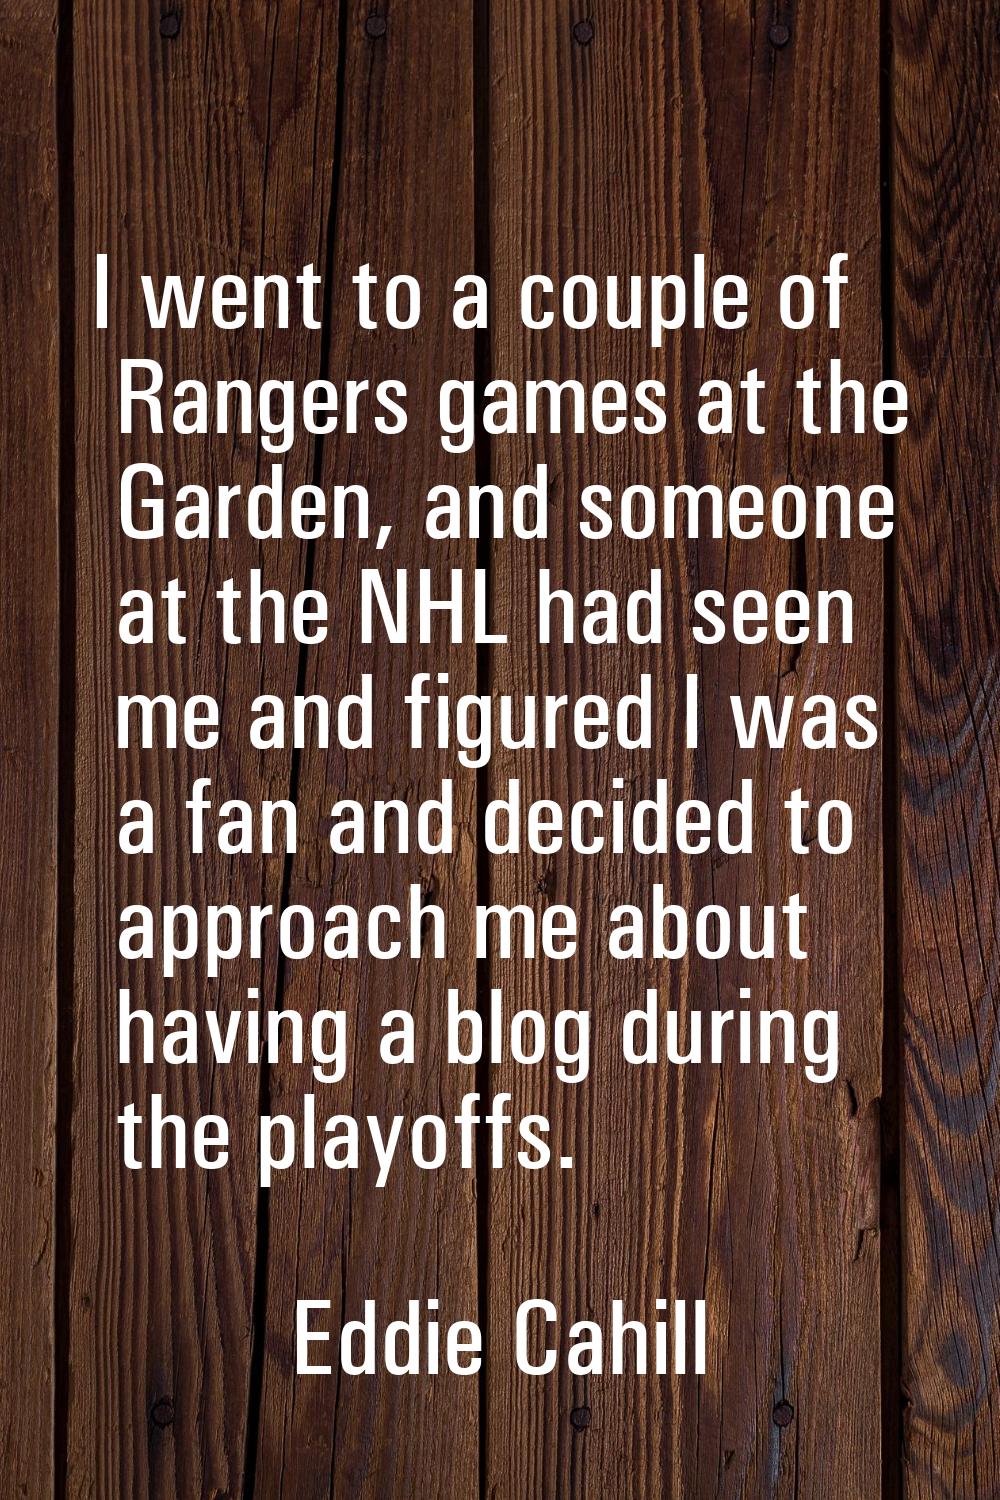 I went to a couple of Rangers games at the Garden, and someone at the NHL had seen me and figured I